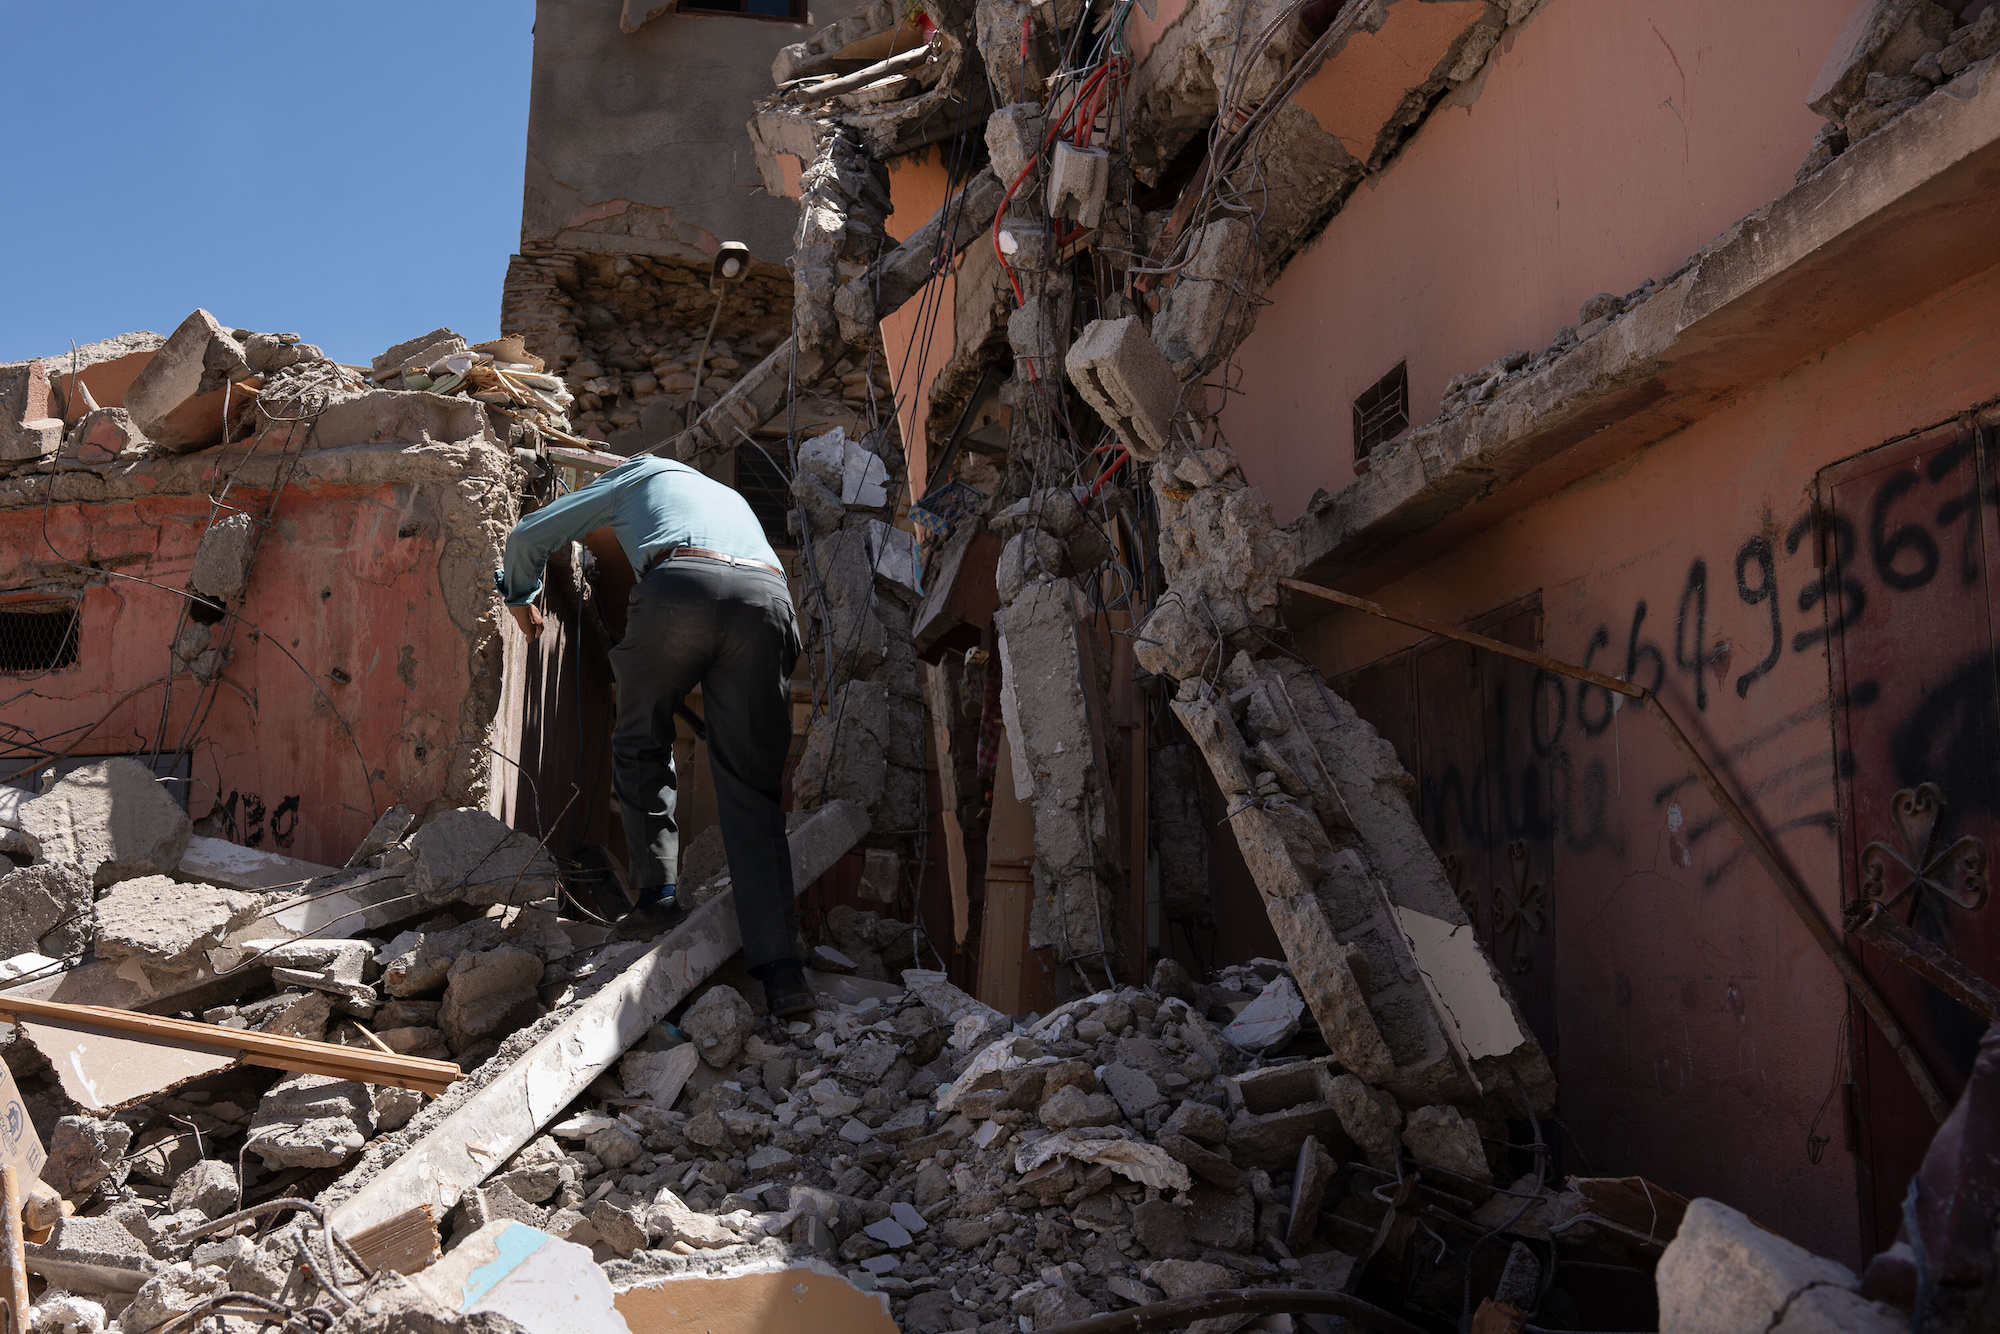 A man enters his house destroyed by the earthquake in the city of Azizmiz on Sunday.